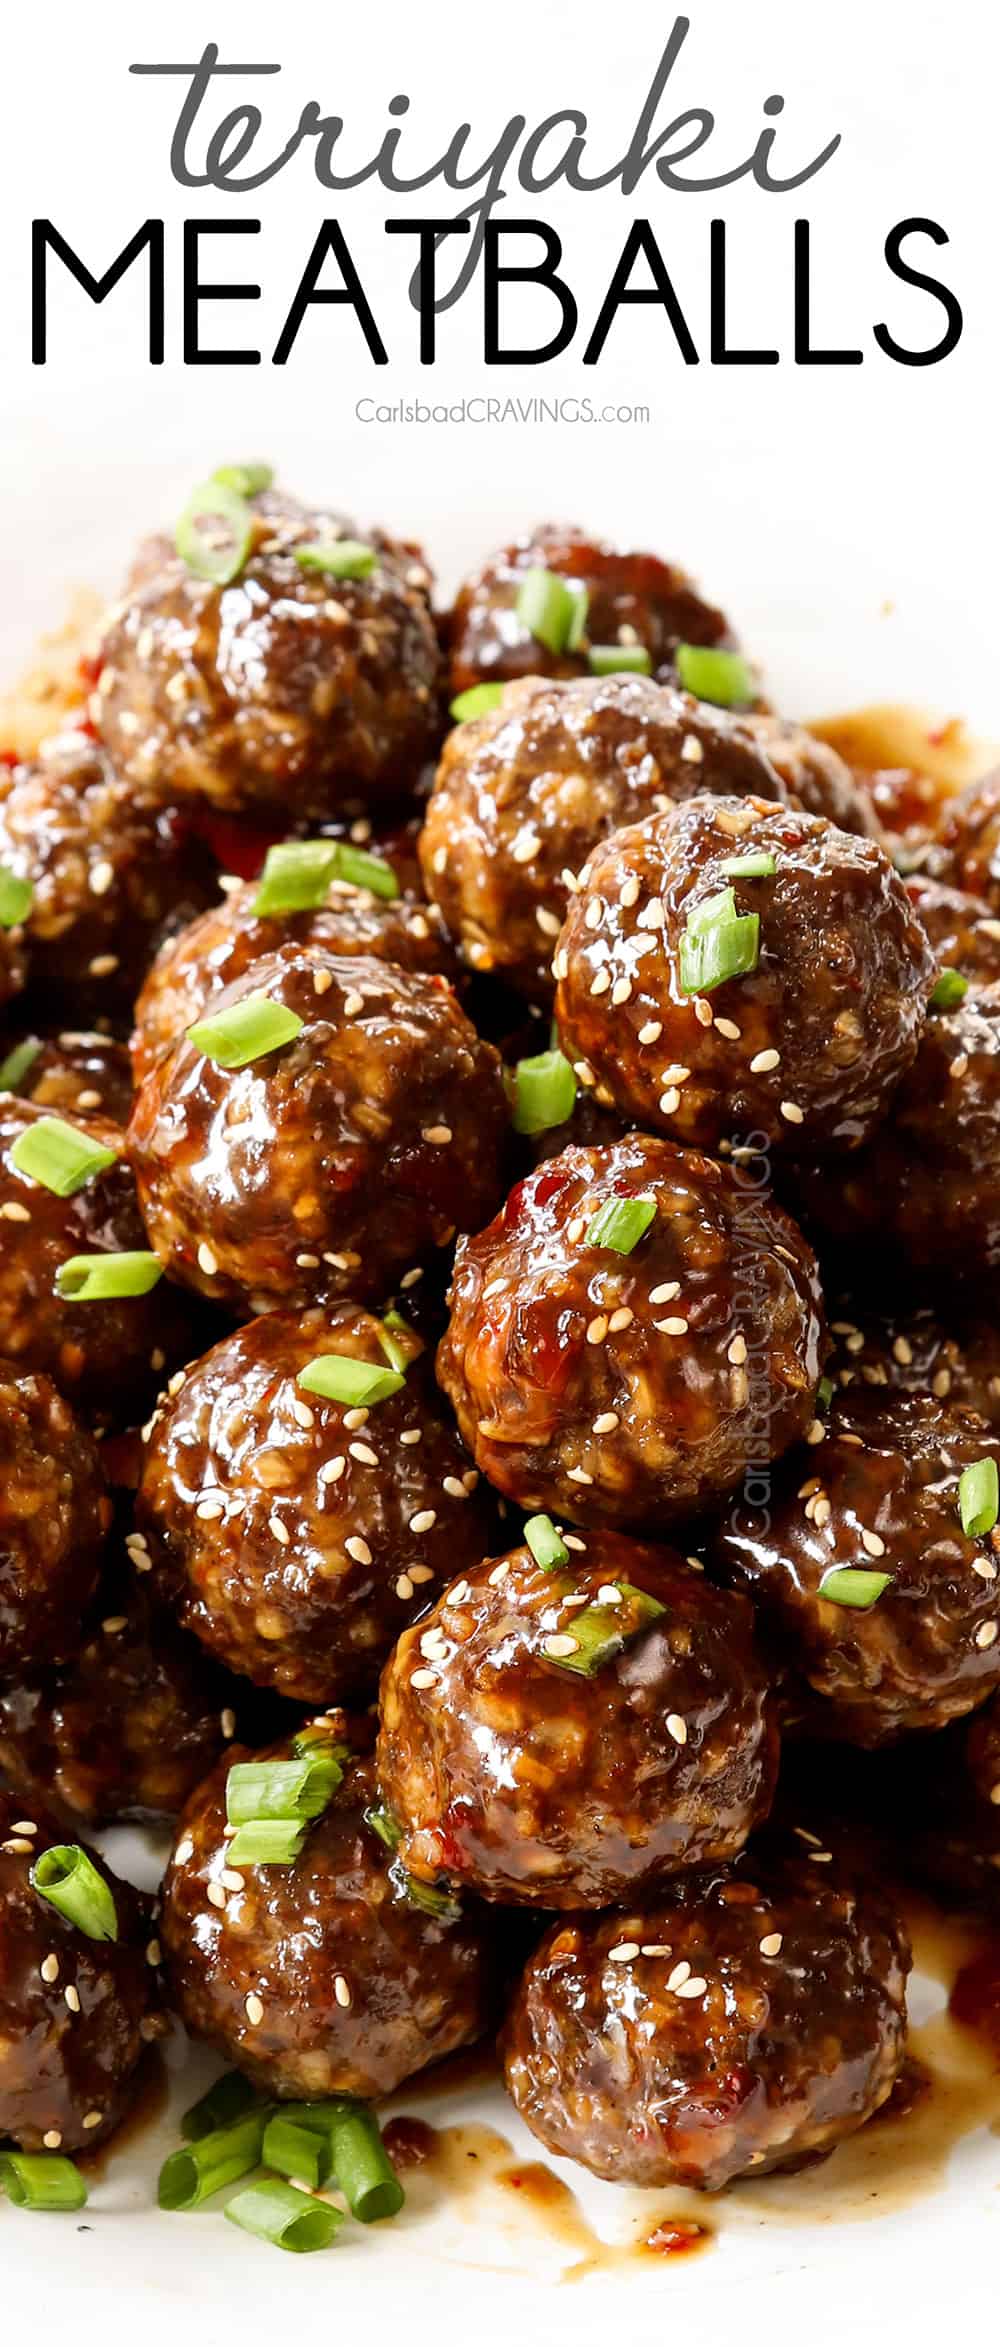 up close of teriyaki meatball recipe showing how juicy they are